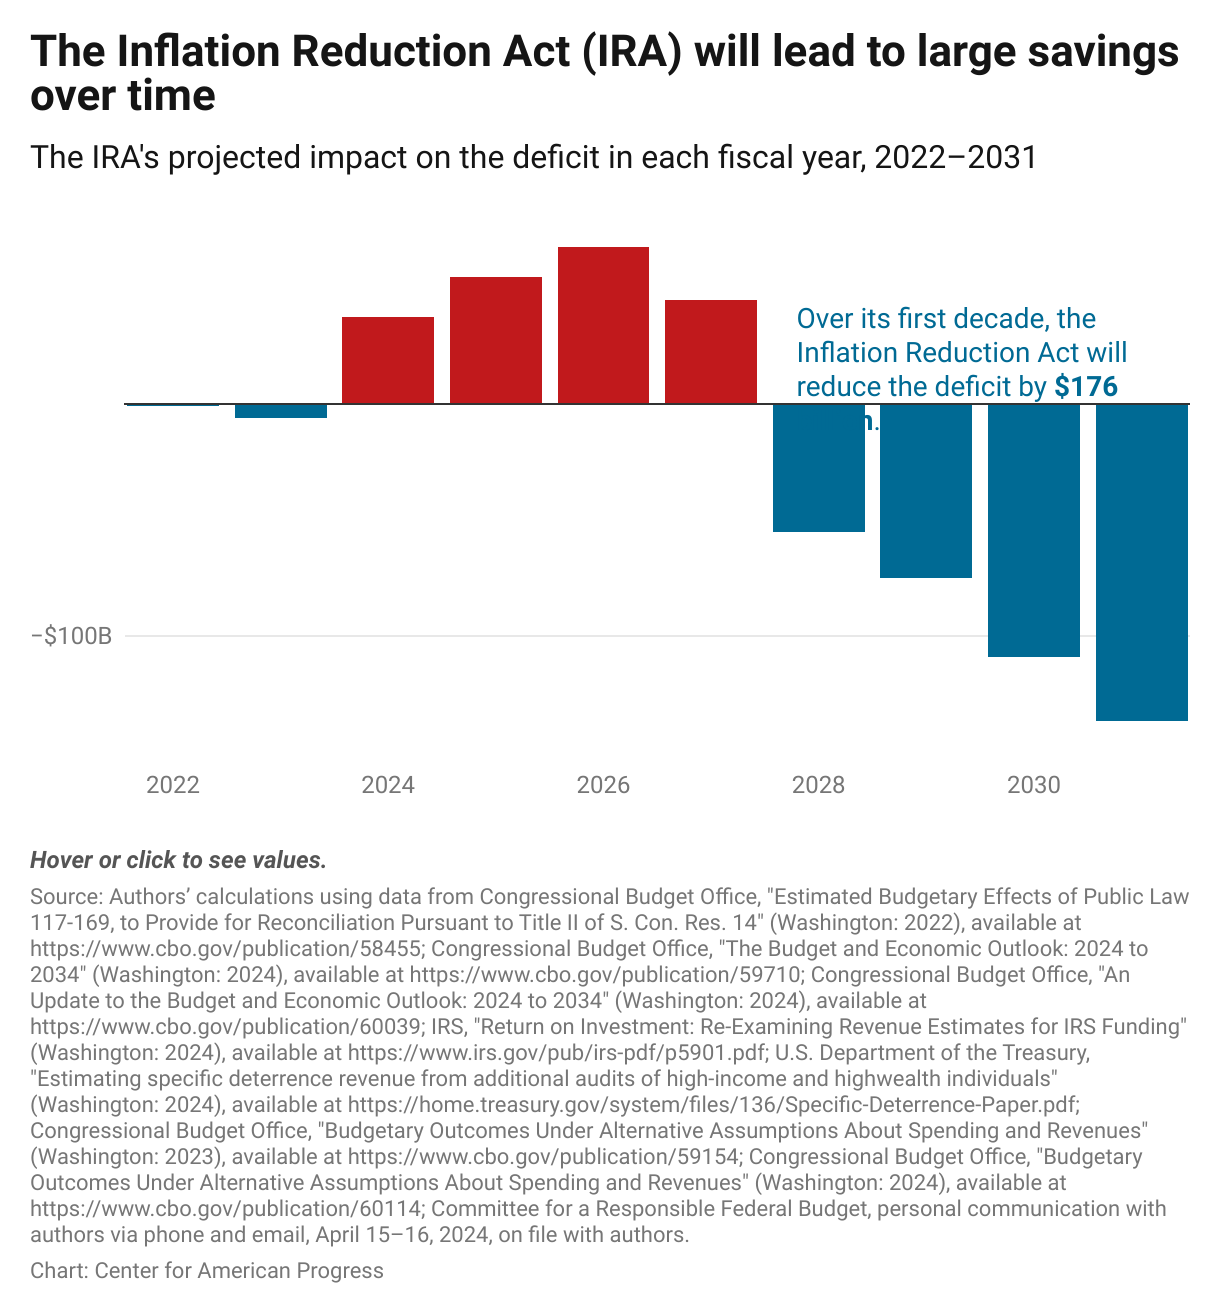 Bar graph showing that the IRA will likely begin to reduce annual deficits starting in fiscal year 2028.